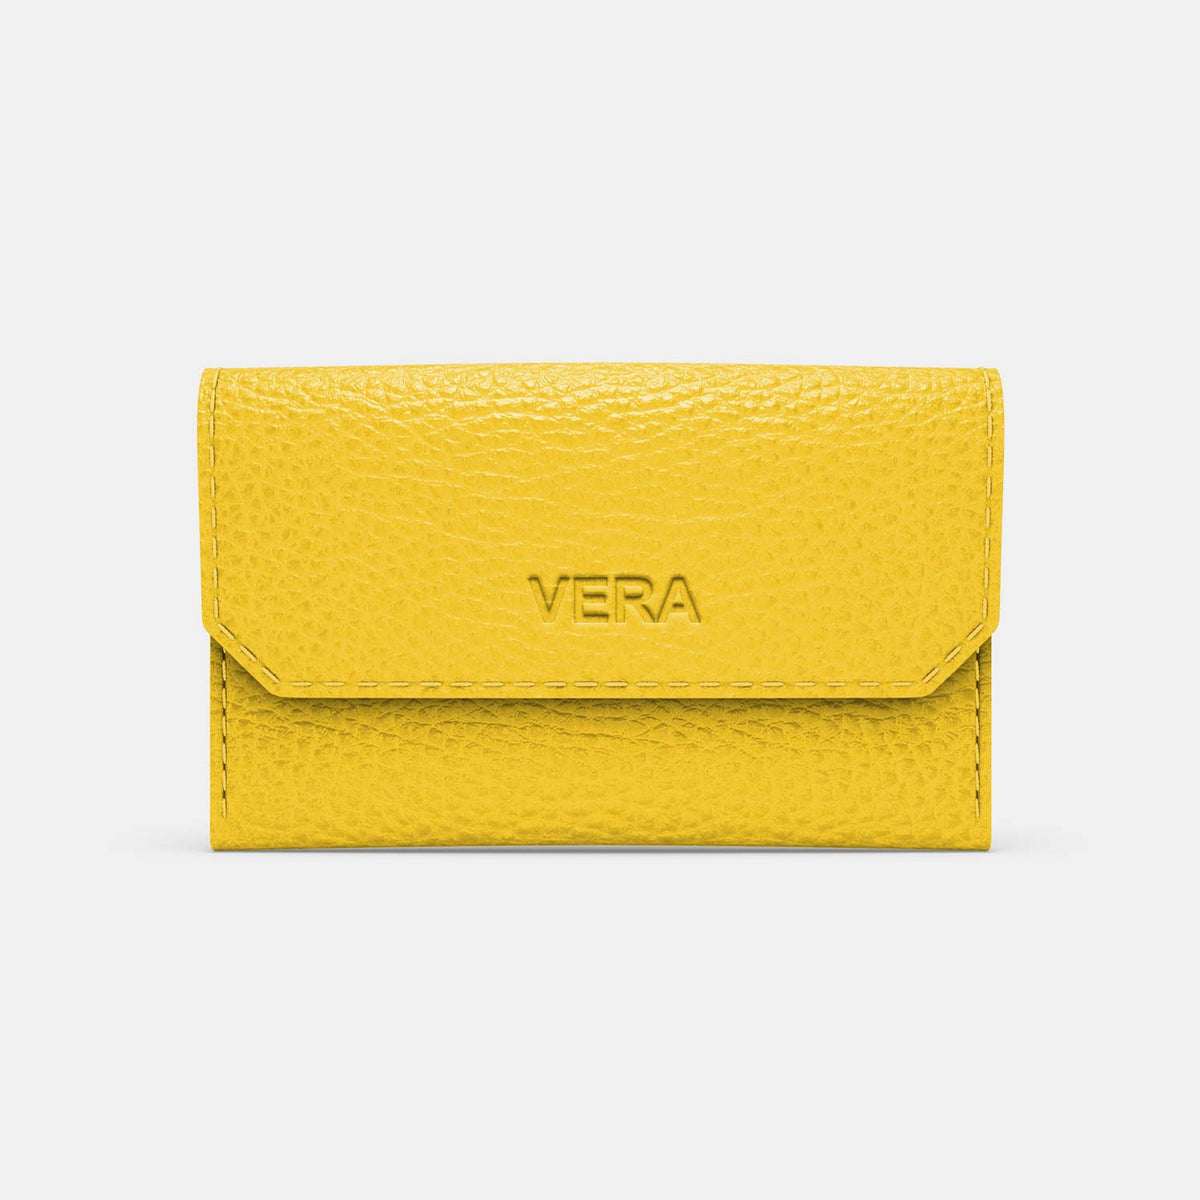 Leather Carry all Wallet - Yellow and Grey